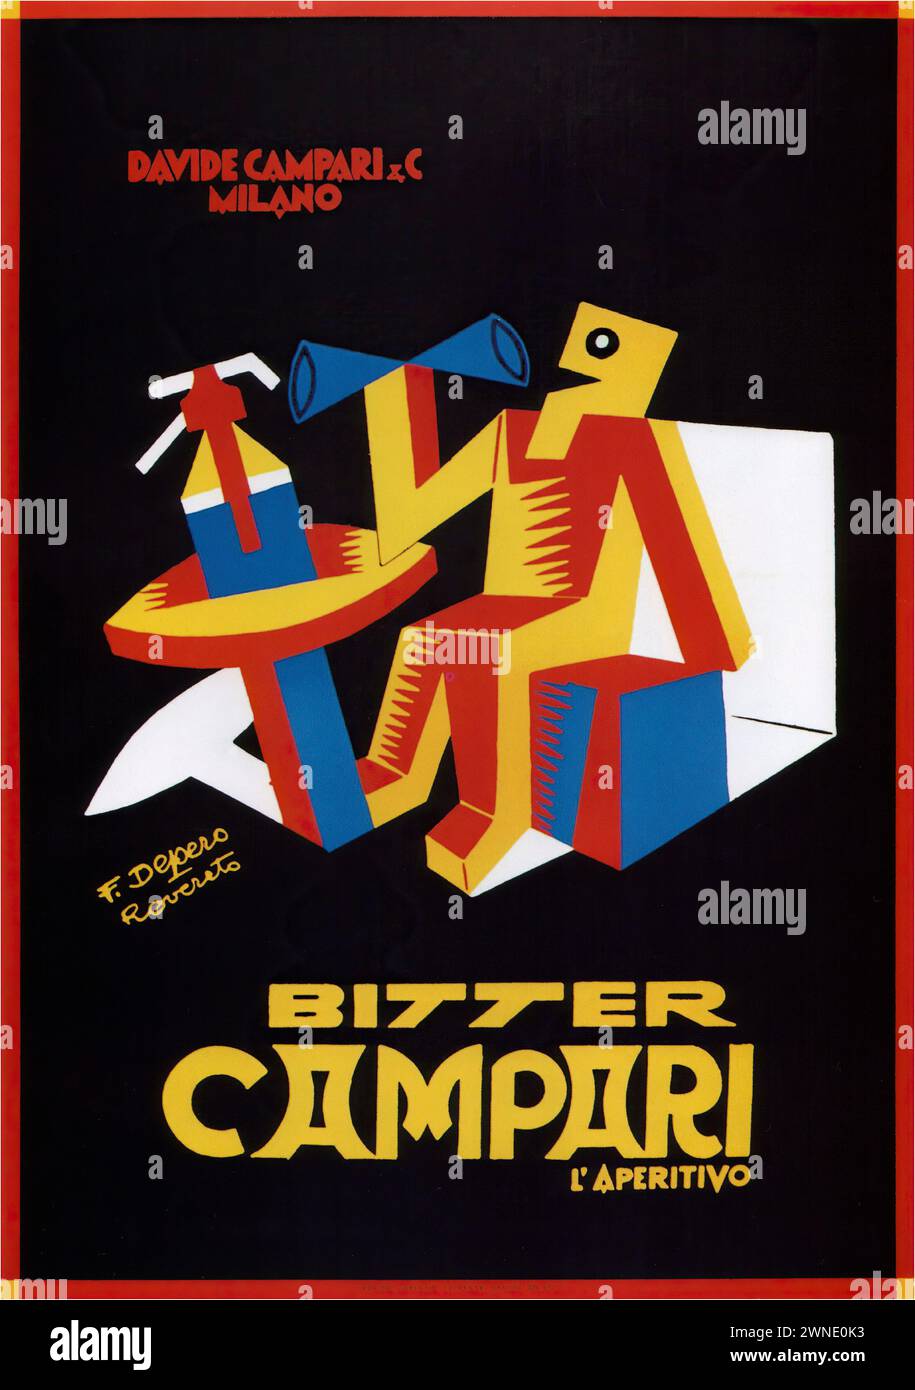 'BITTER CAMPARI L'APERITIVO' ['BITTER CAMPARI THE APERITIF'] Vintage Italian advertising poster by Fortunato Depero, showcasing the Cubist influence with abstract figures enjoying Campari, characterized by bold colors and geometric shapes, reflecting the avant-garde style of the 1920s. Stock Photo